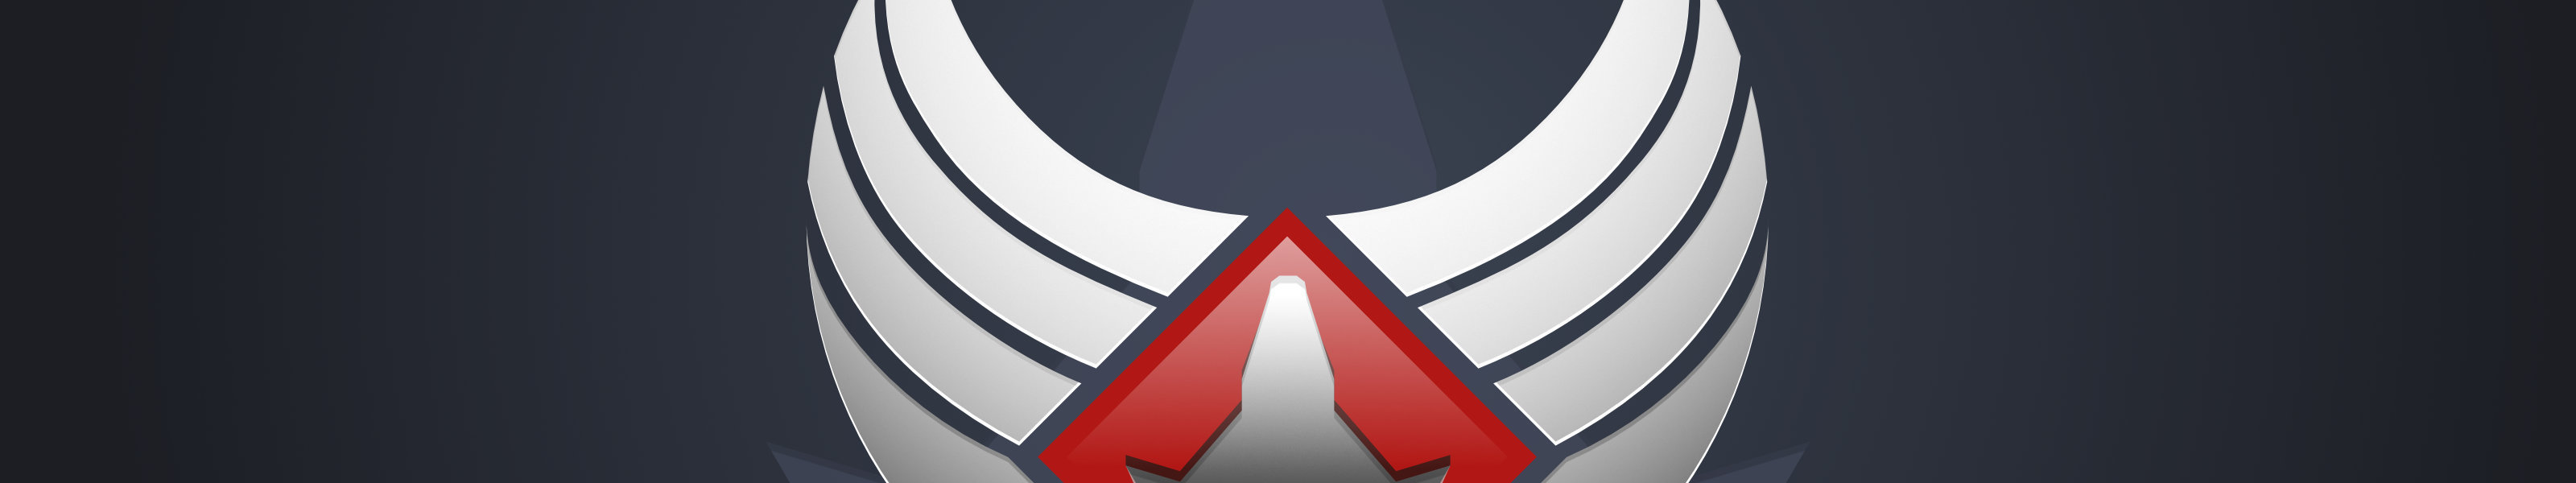 A futuristic winged logo. The middle is formed by a diamond shape that contains a Flare ship silhouette.